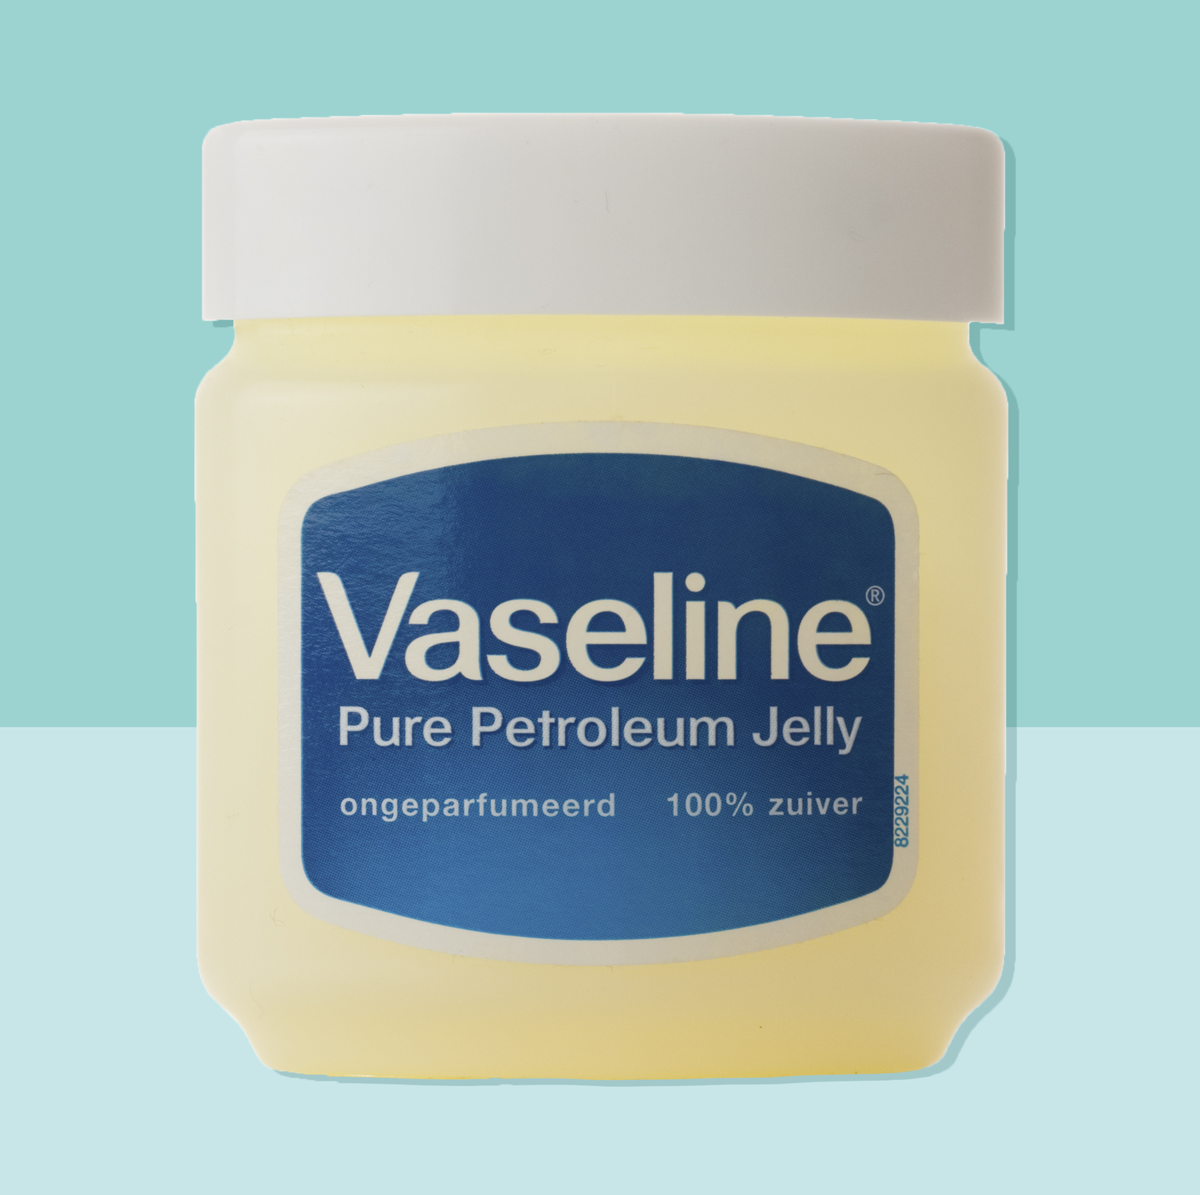 10 BENEFITS AND USES OF VASELINE PETROLEUM JELLY